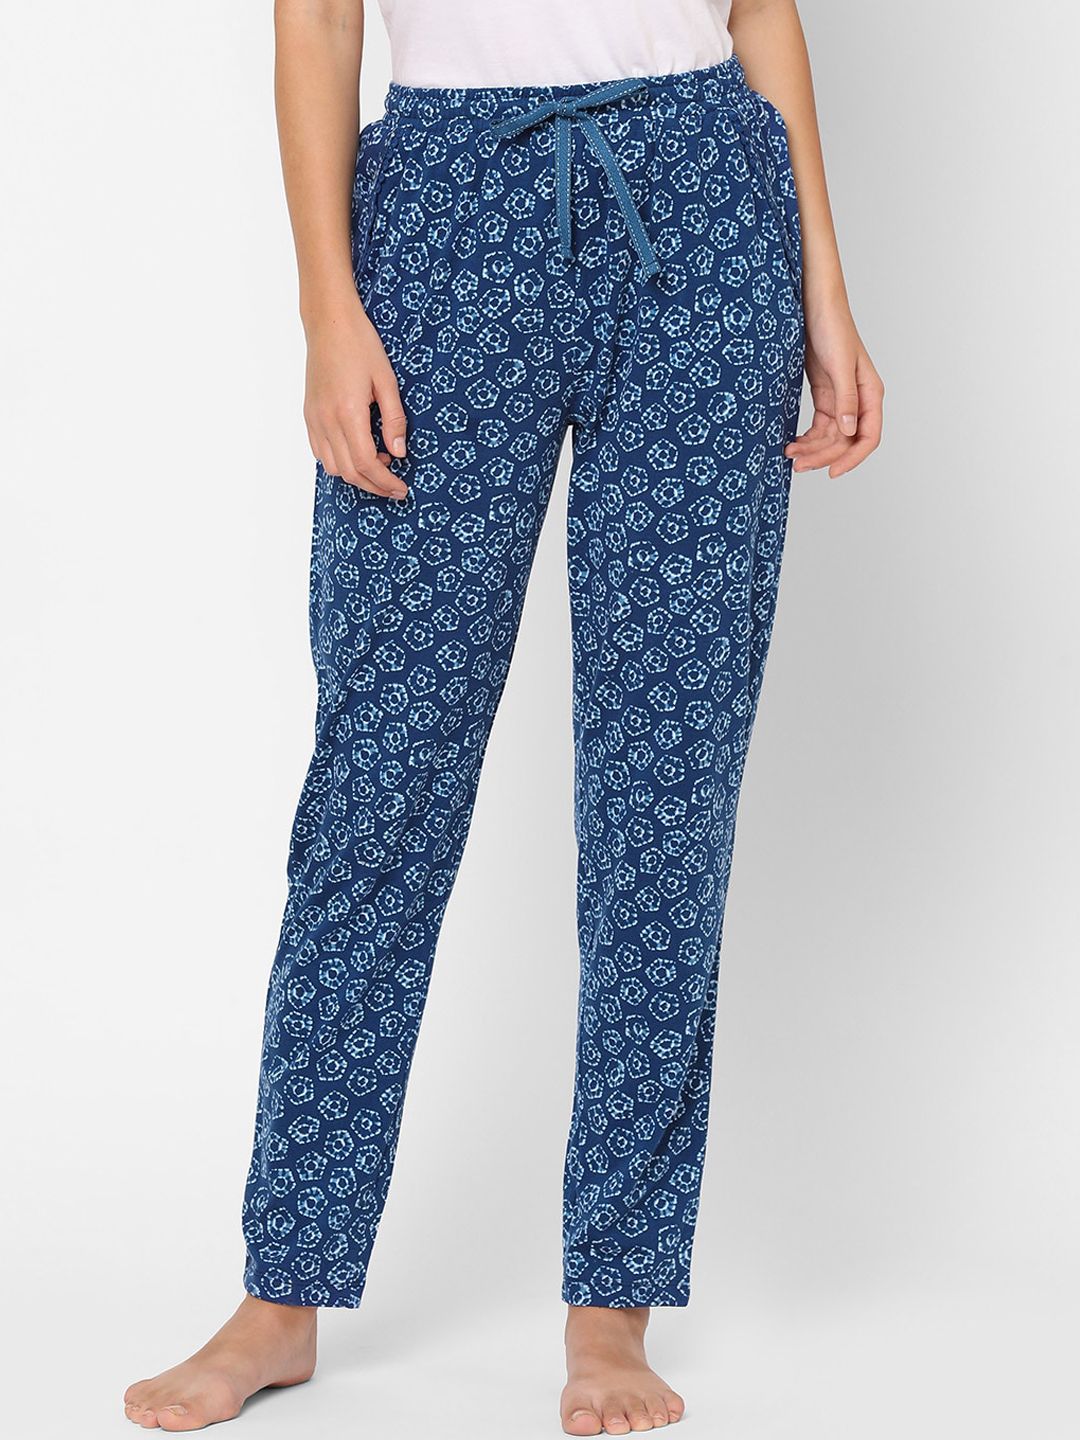 Maysixty Women Navy Blue Printed Lounge Pants Price in India